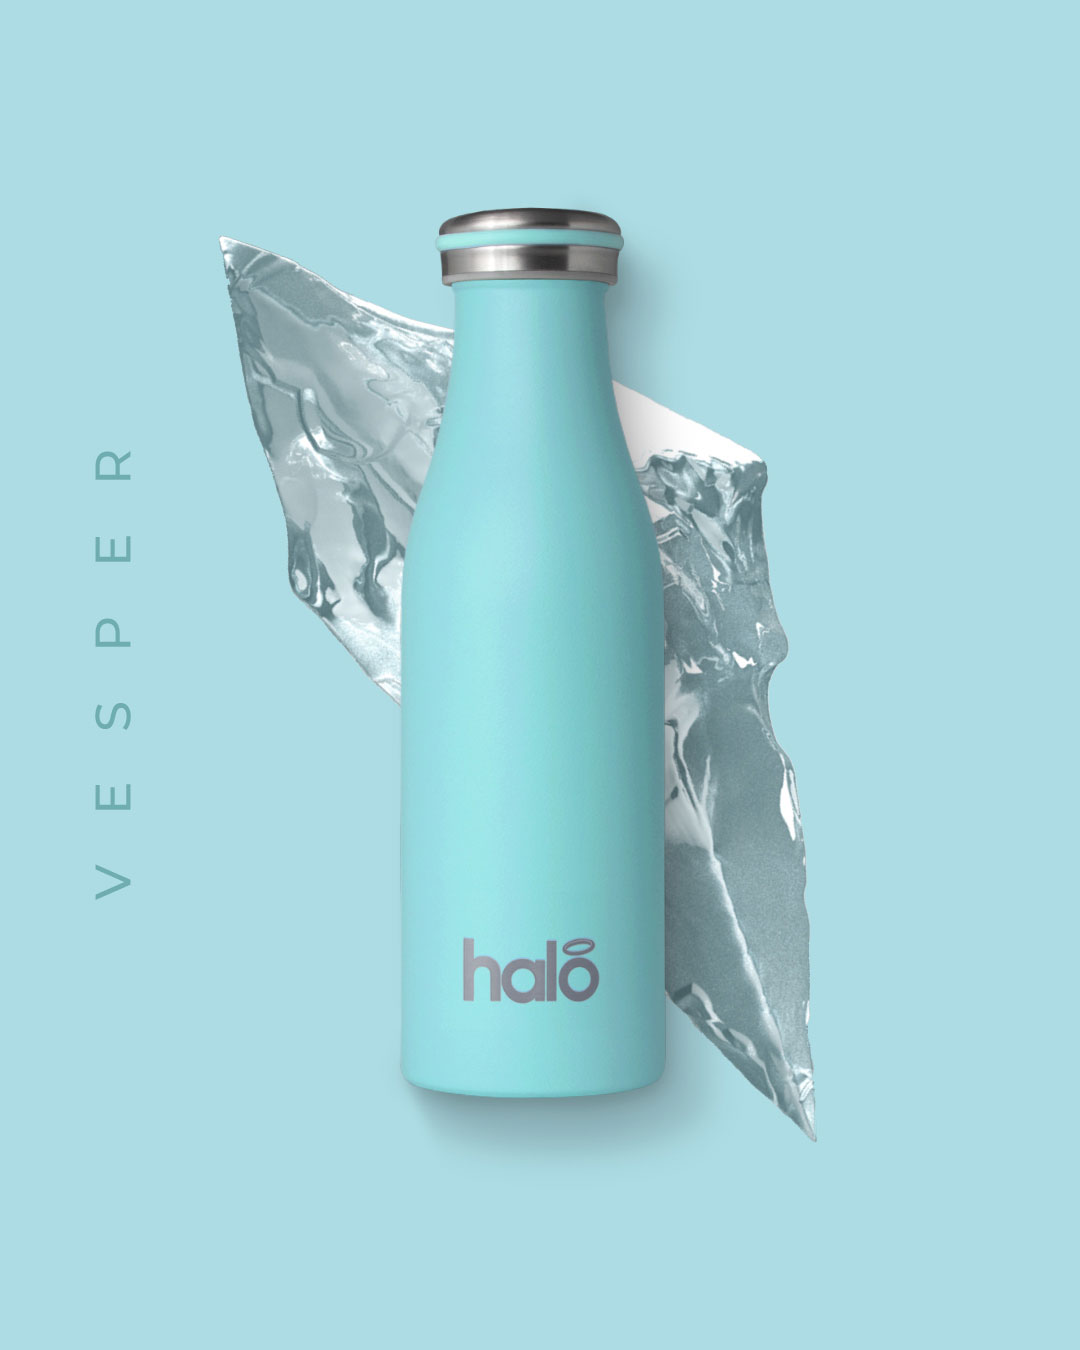 Halo Bottle 500ml green reusable water bottle with ice.